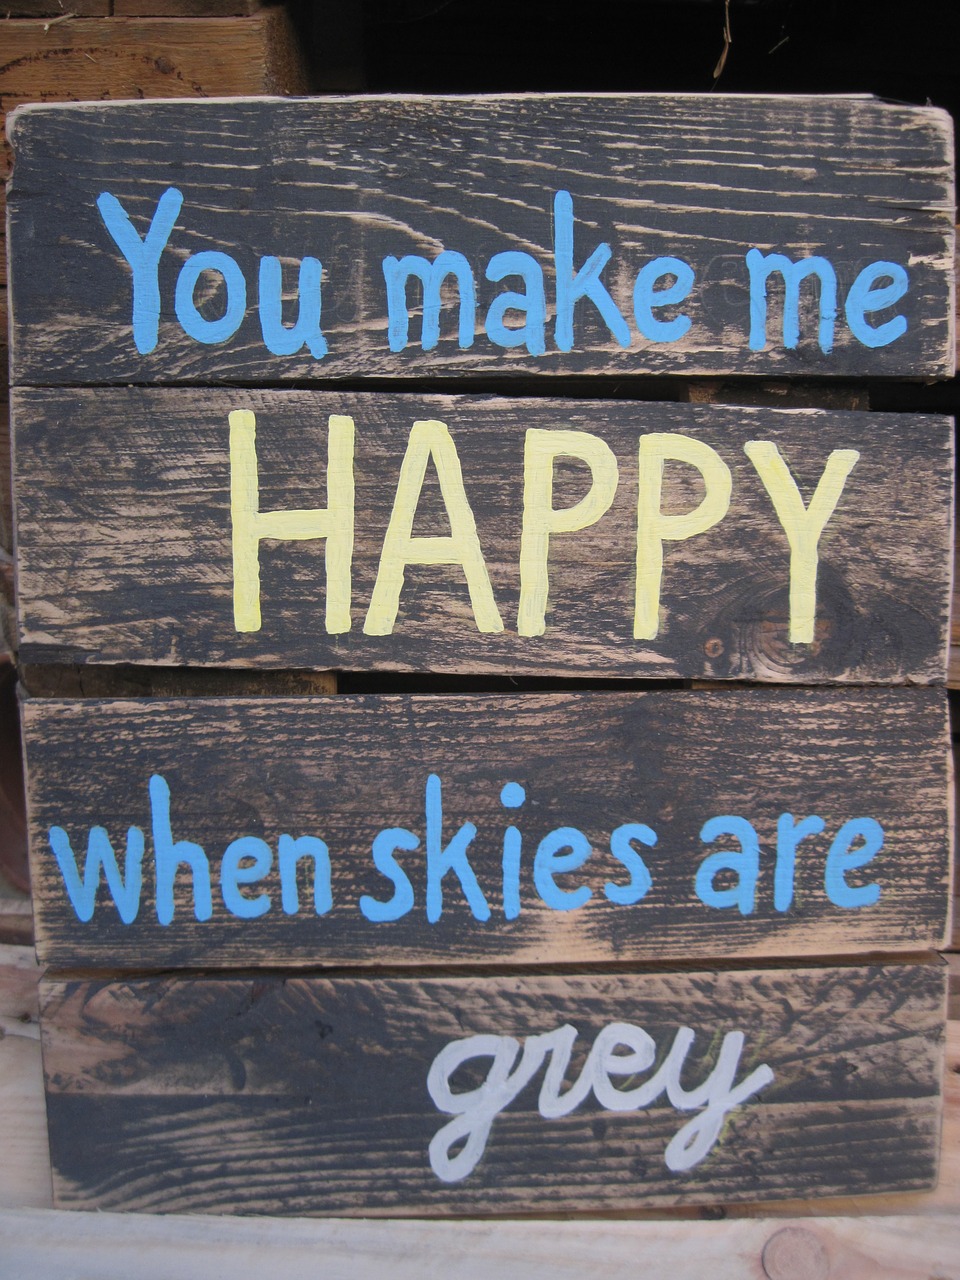 quote you make me happy skies are grey free photo